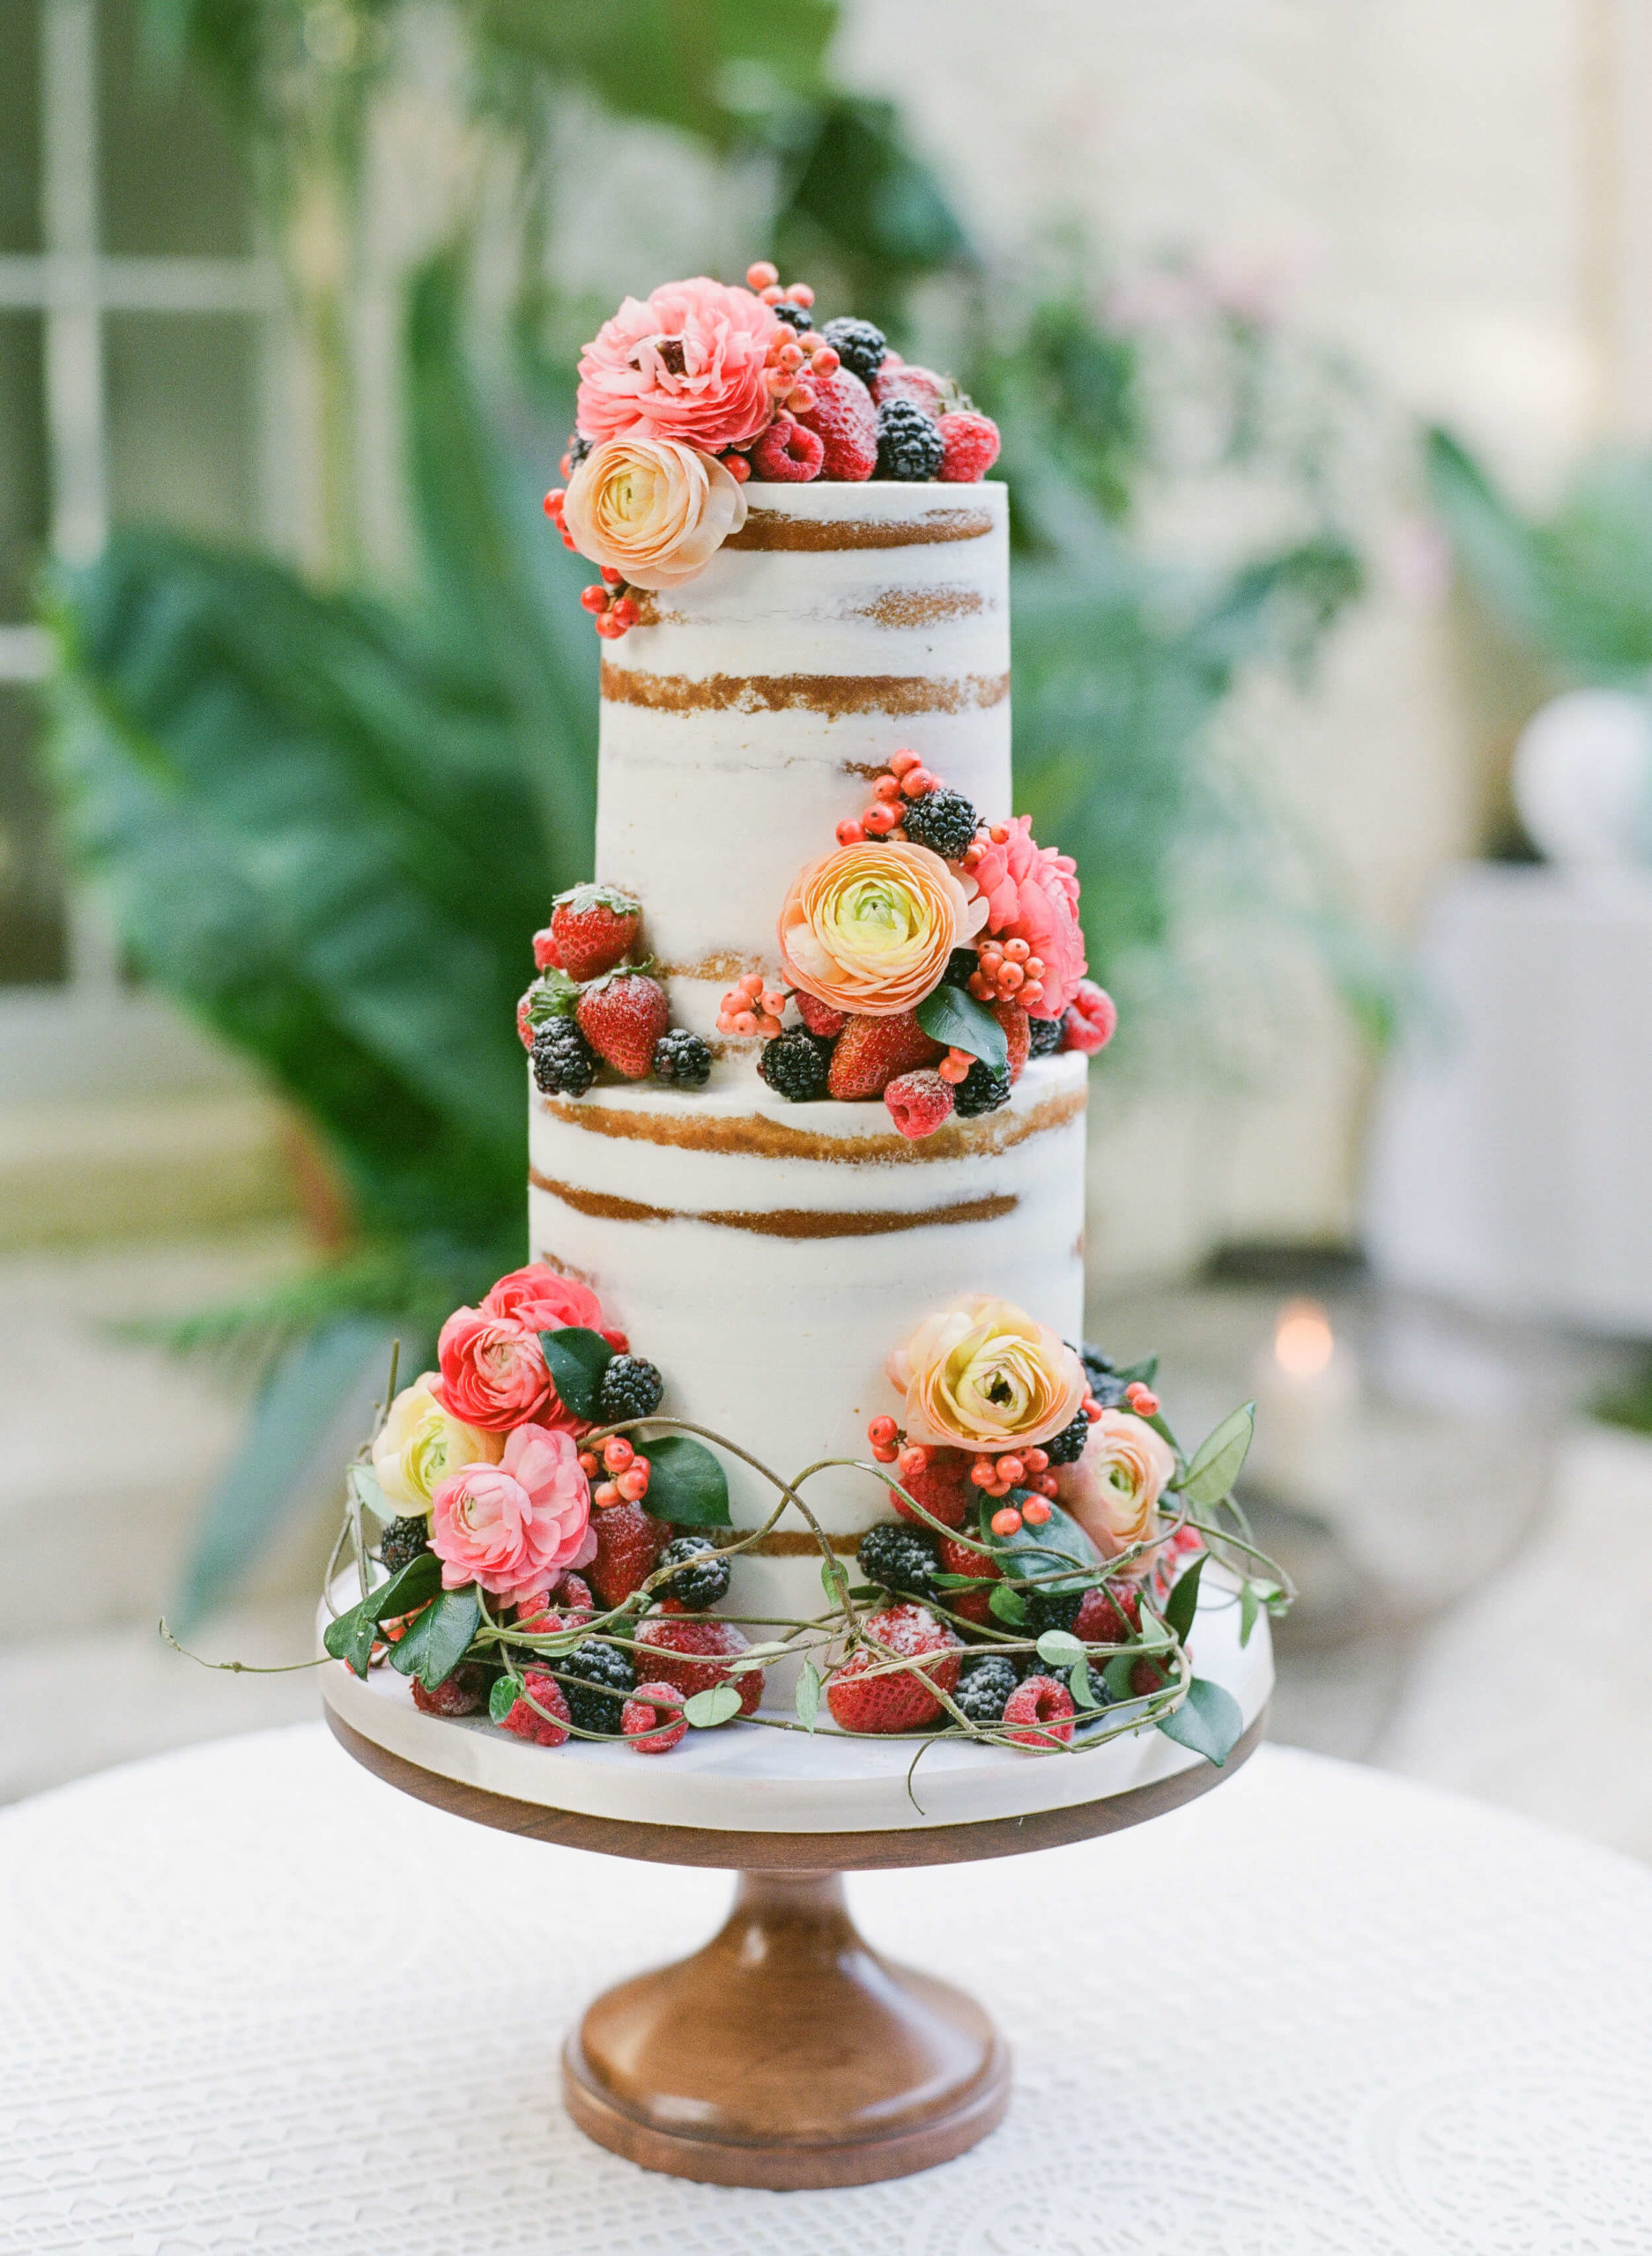 Colorful wedding cake covered in fruit and flowers.